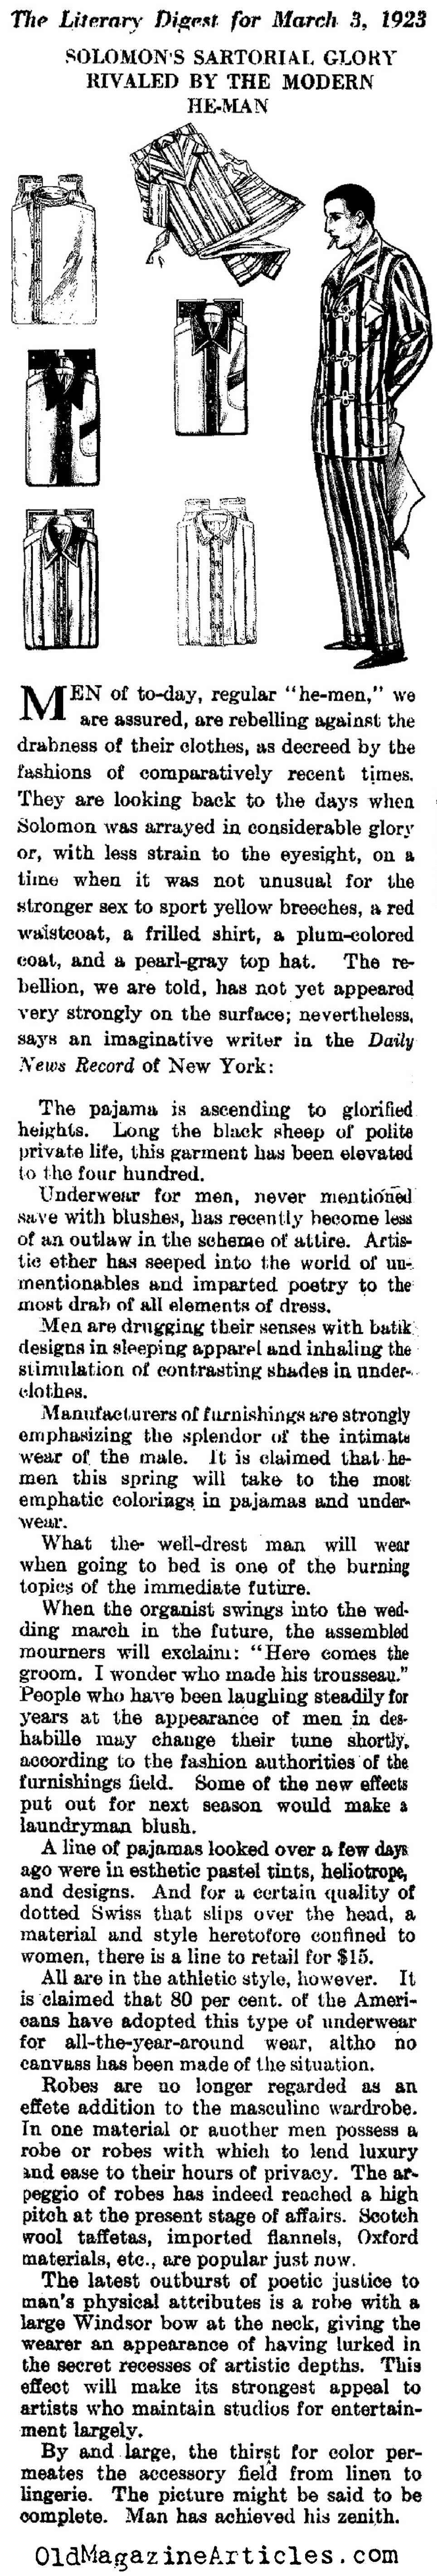 The Pajama Ascendency (Literary Digest, 1923)